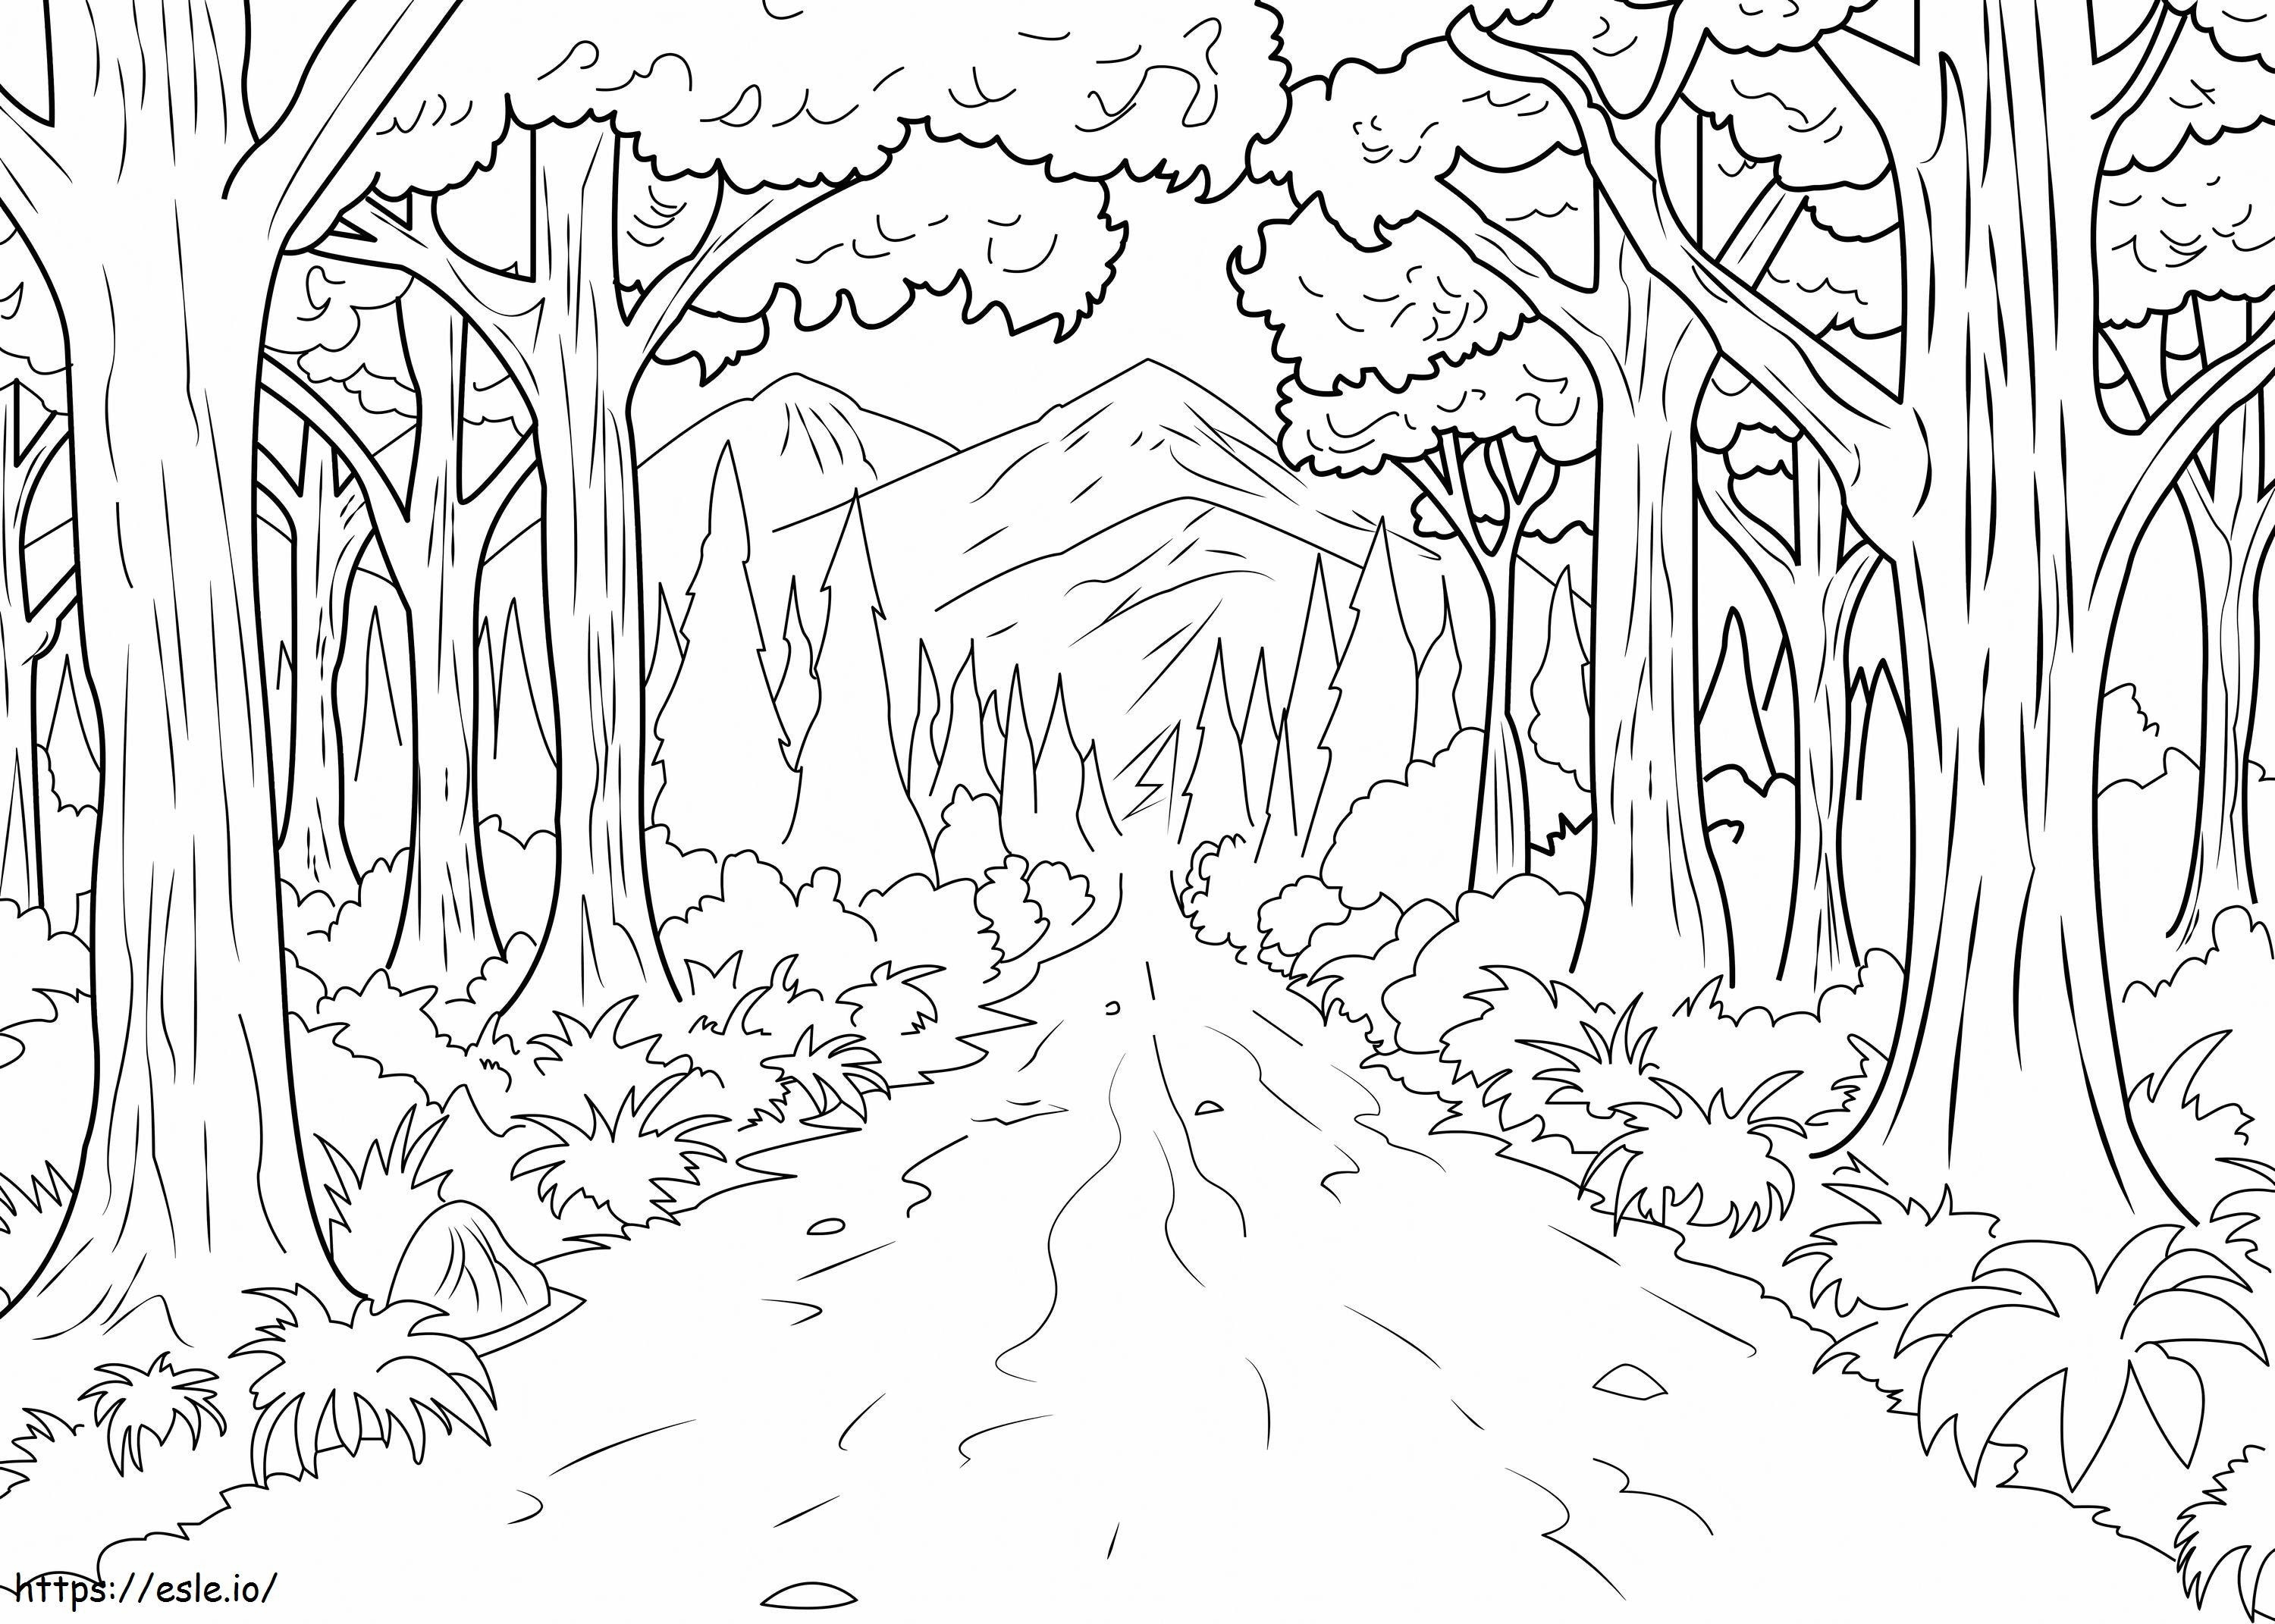 Nature Path In The Forest coloring page